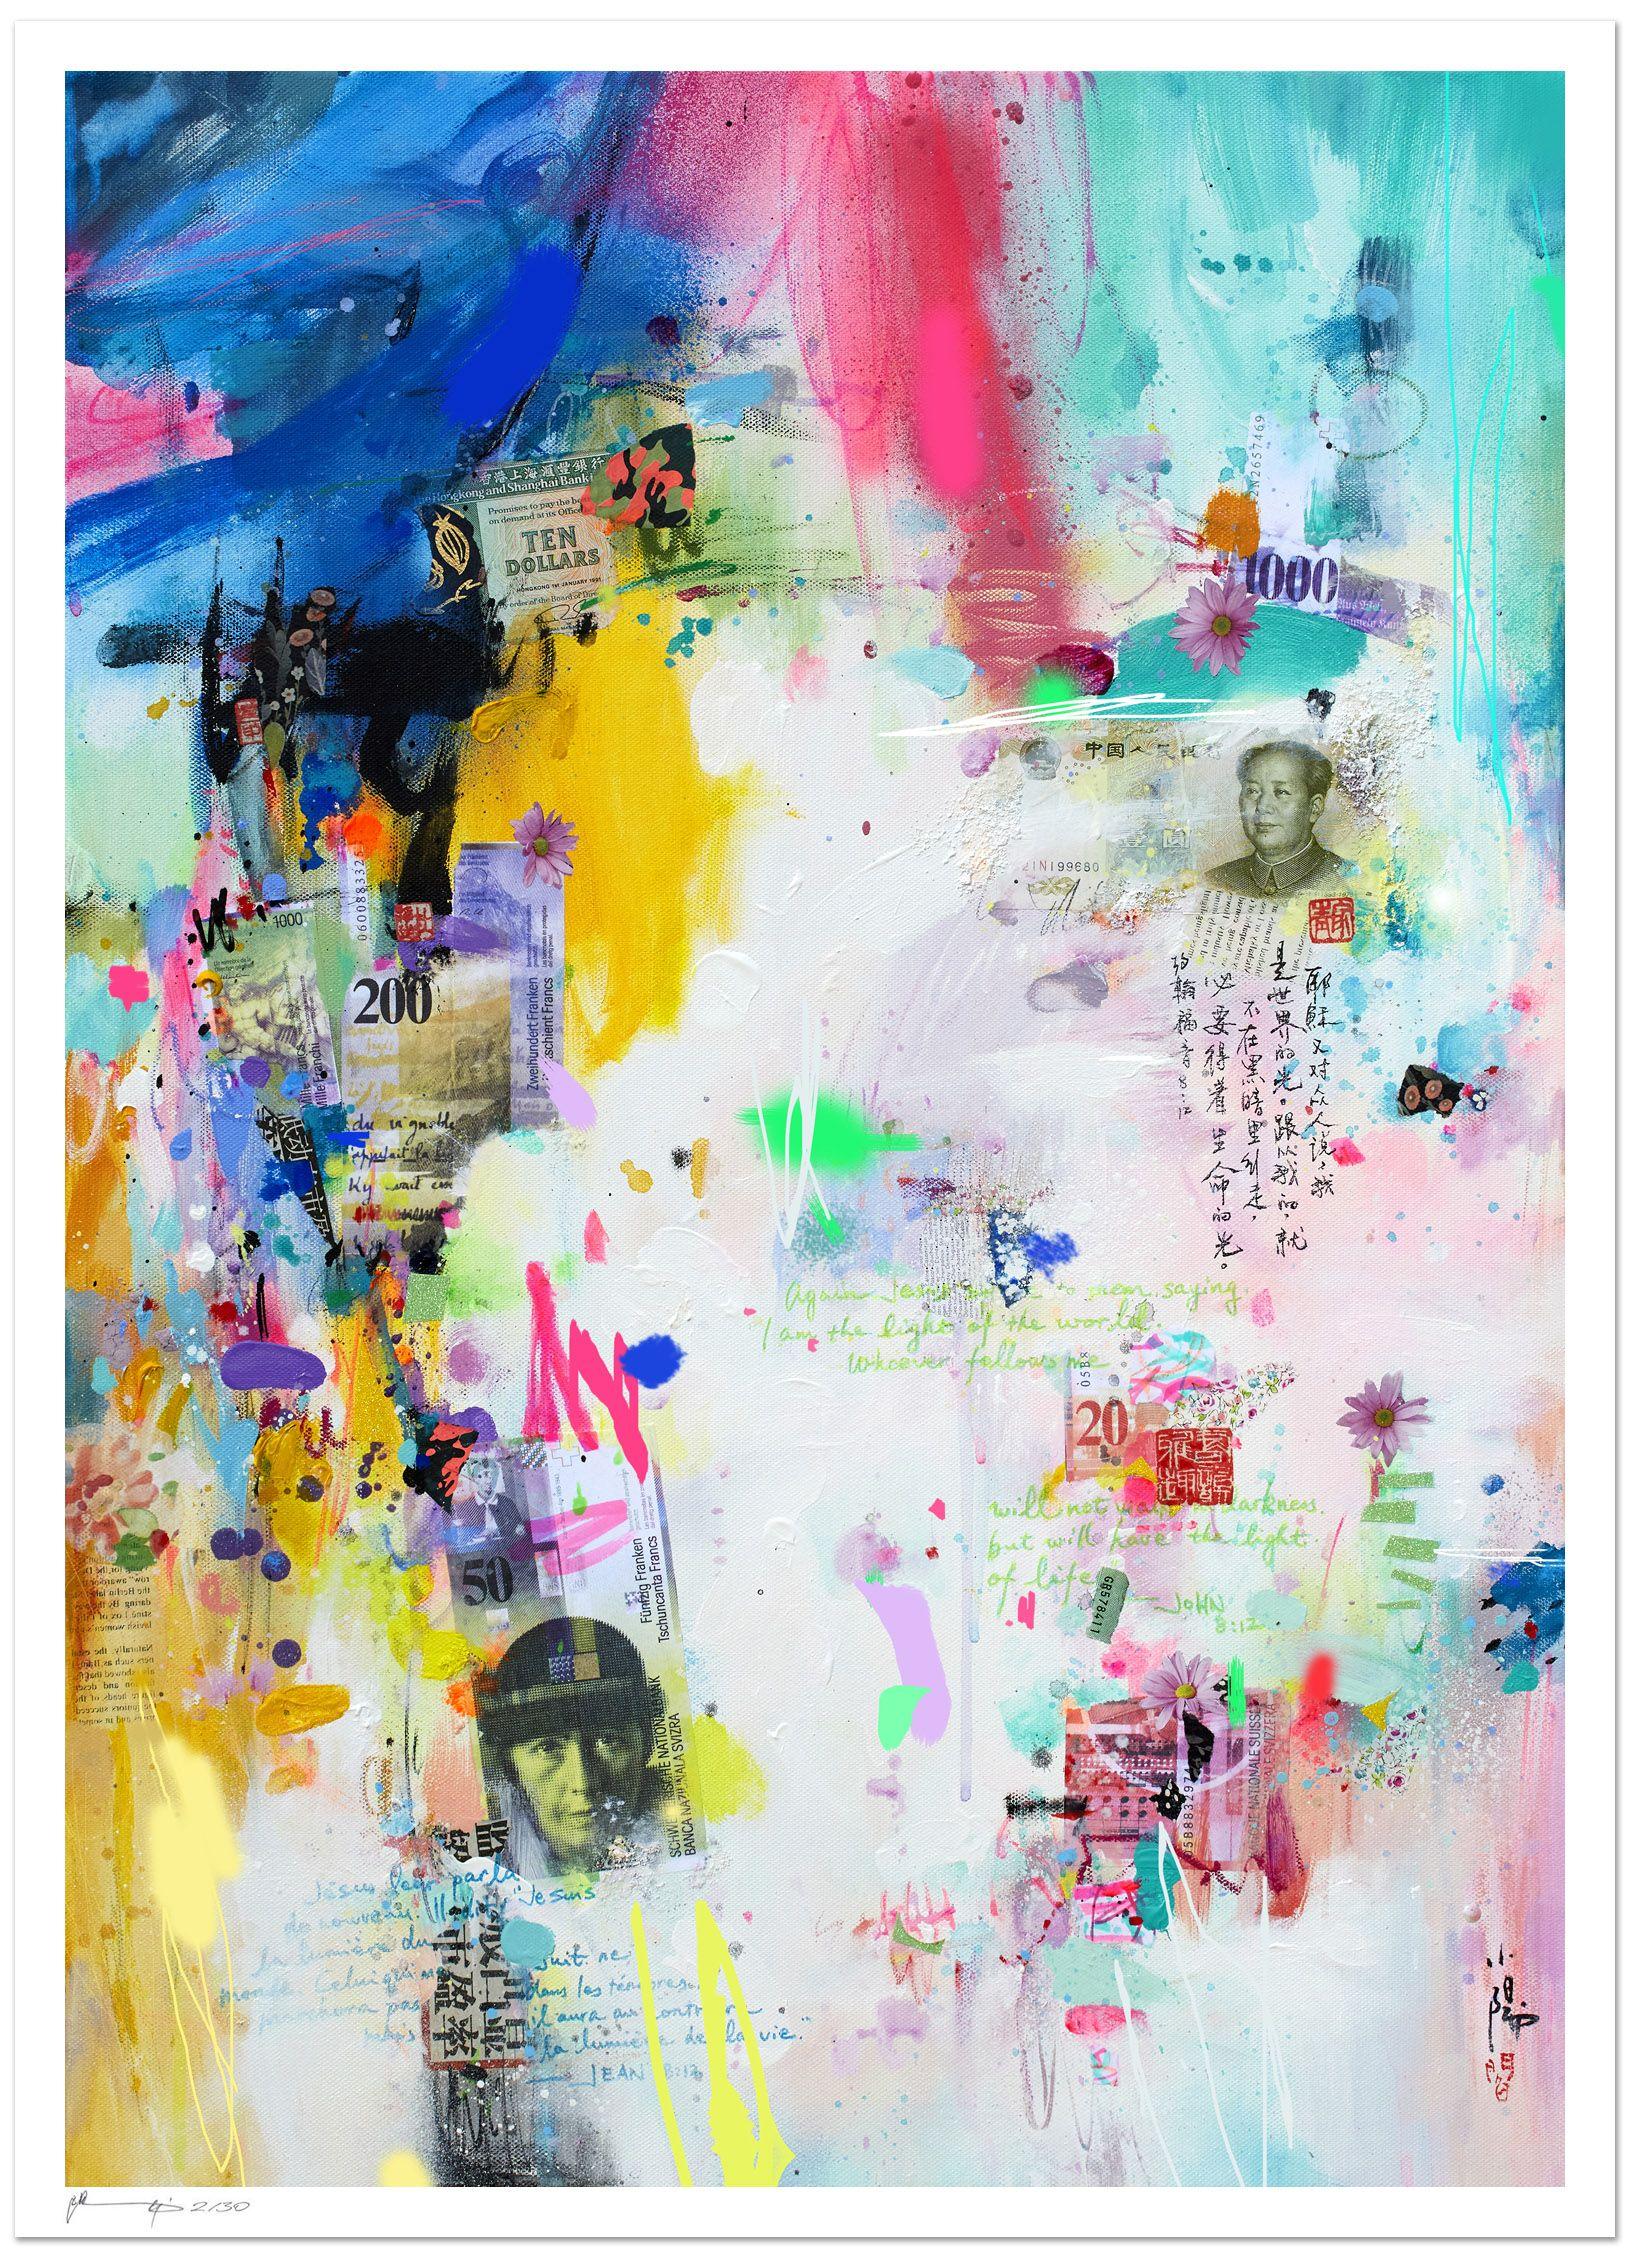 Xiaoyang Galas Abstract Print - Money world - GiclÃe print on paper, Digital on Paper